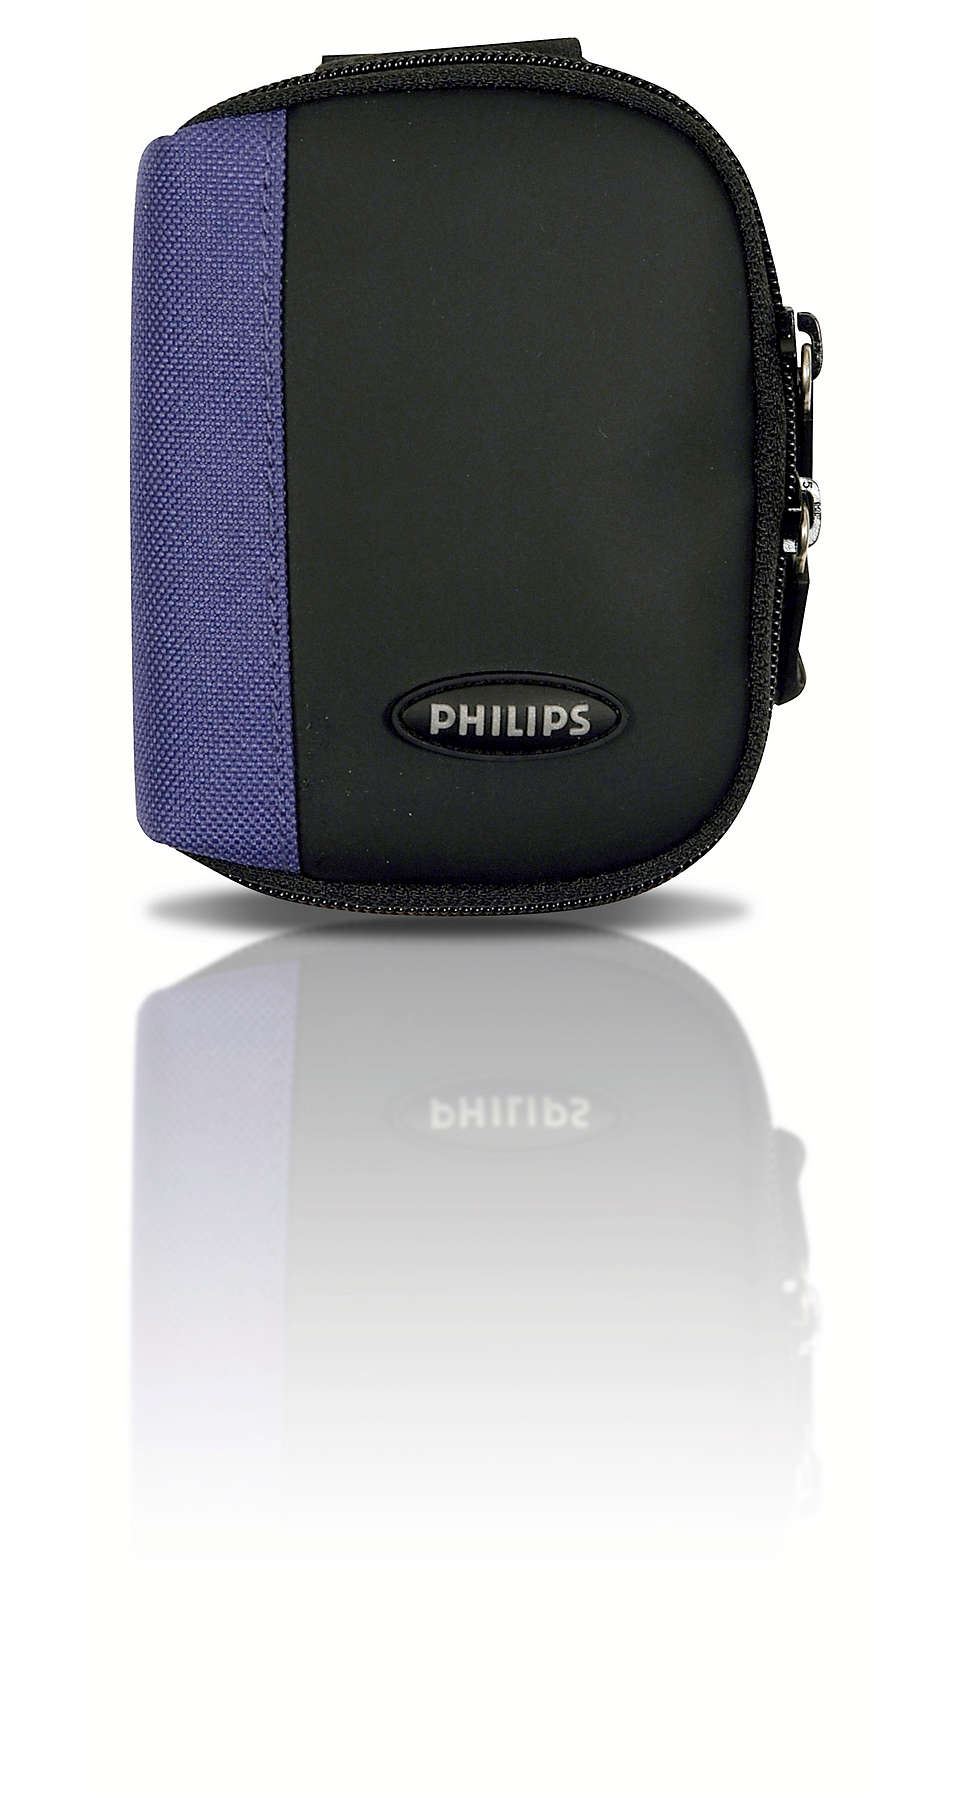 Carry and protect your MP3 player